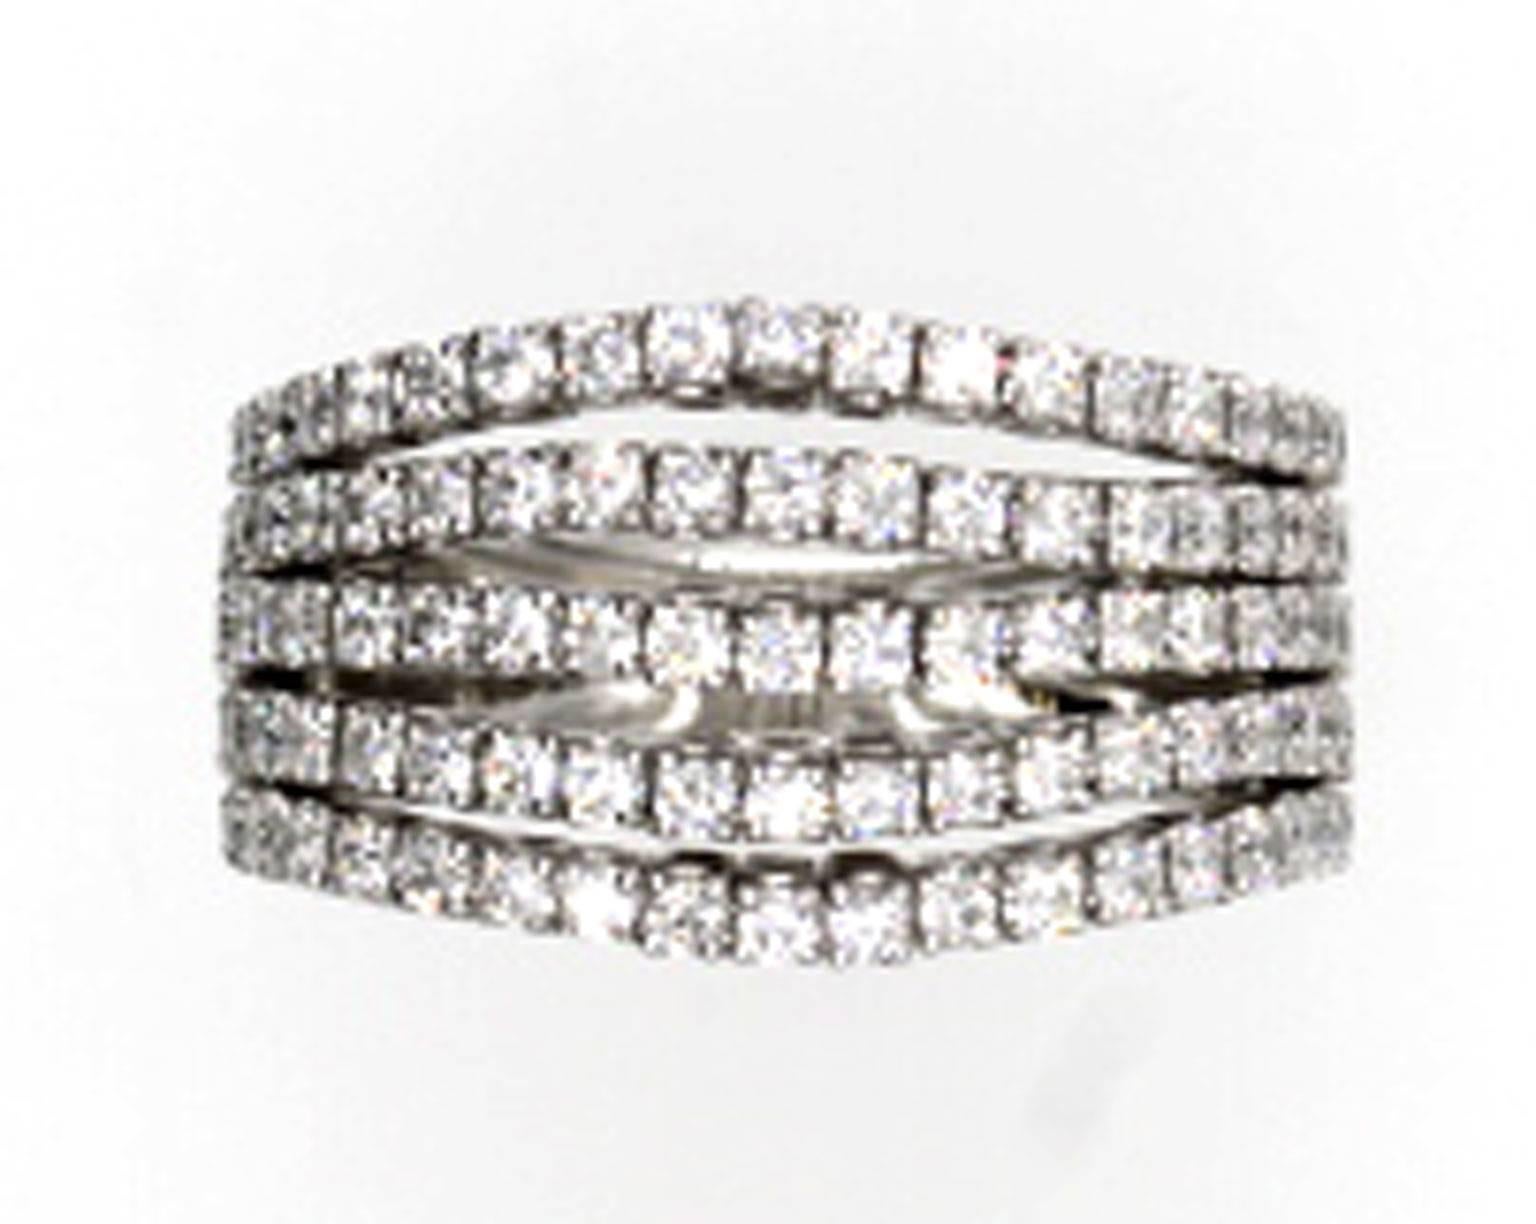 This fashionable diamond ring features five flexible rows of diamonds set in 18-karat white gold. The diamond rows are not connected in the front so they can move freely, but the ring is connected and solid in the back. There are 95 round brilliant